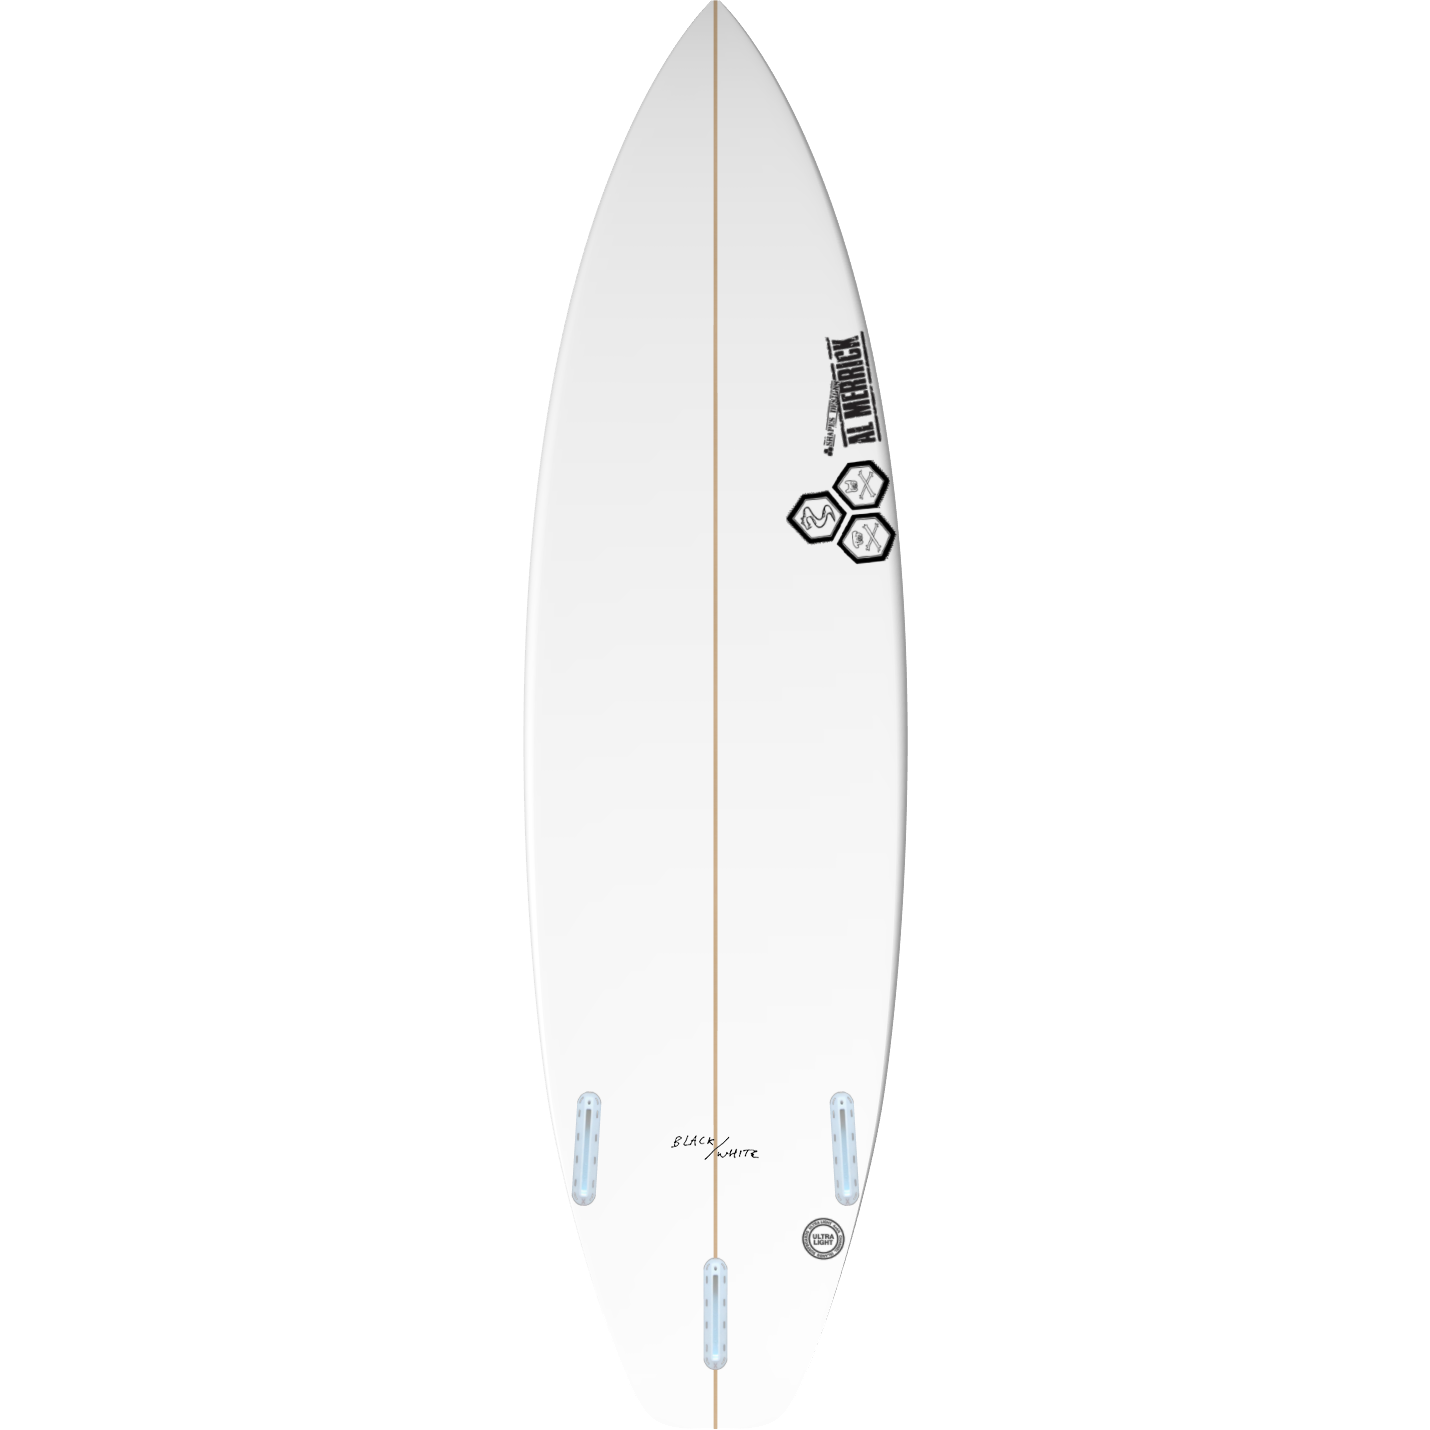 Channel Islands - Black and White Surfboard